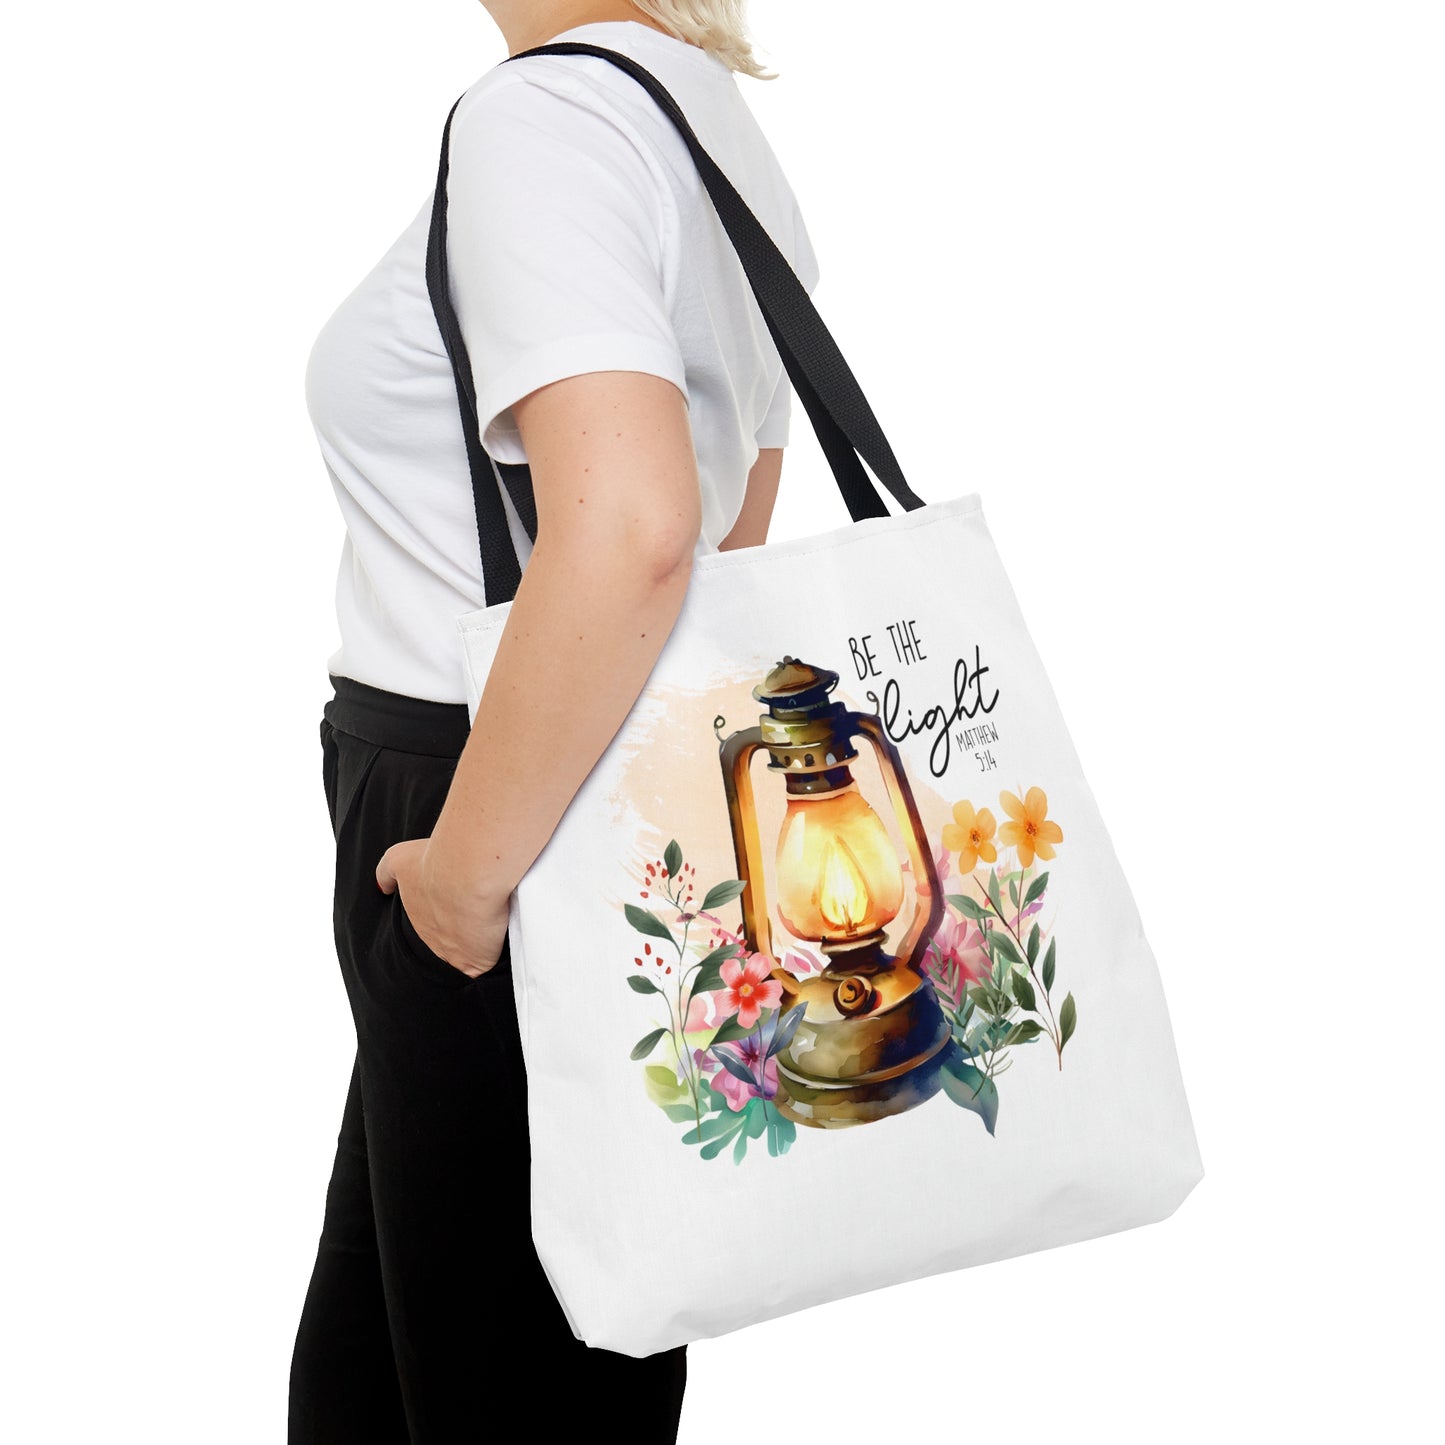 Be the Light Tote Bag, Christian Gifts